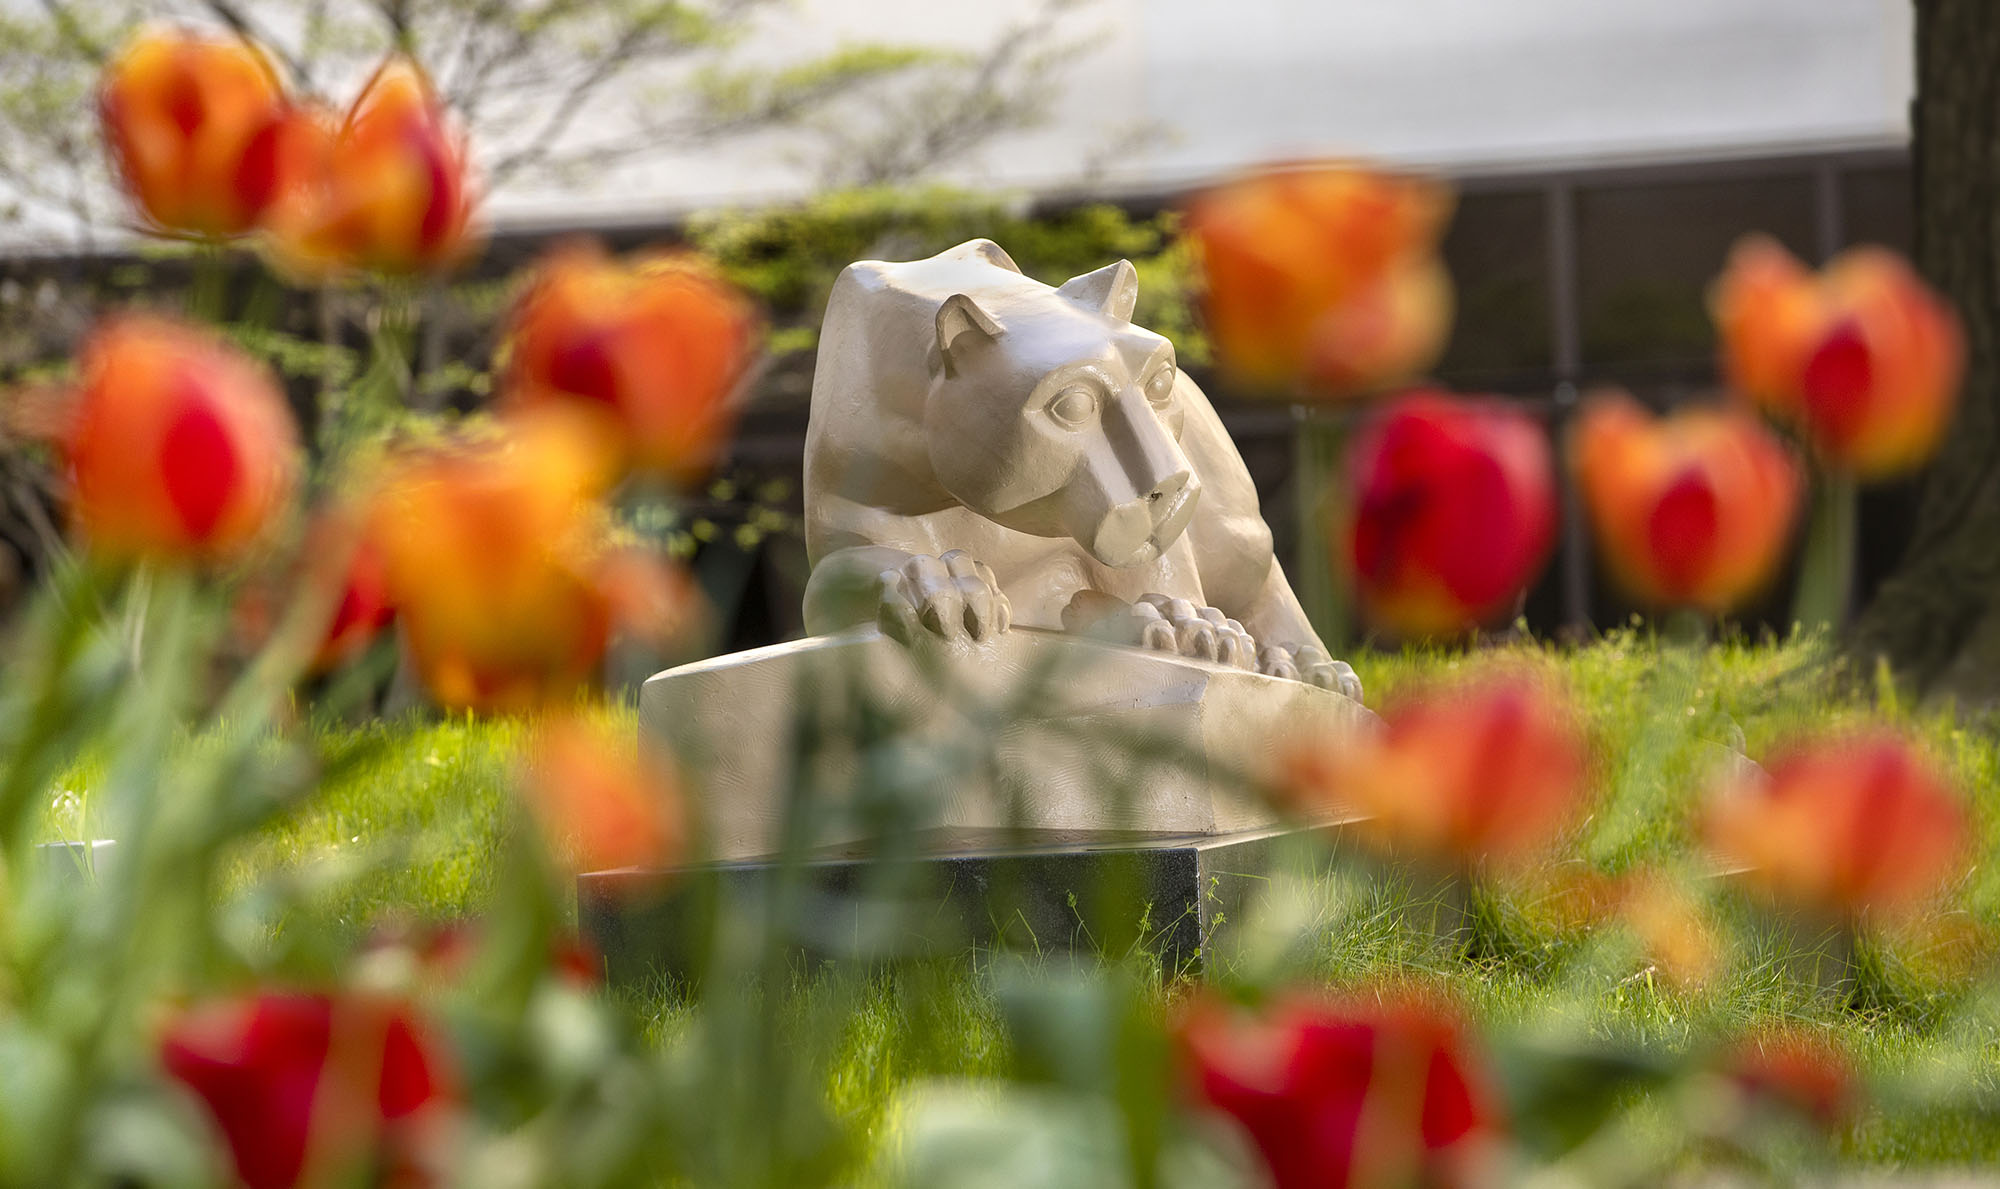 Nittany Lion statue in courtyard of Penn State College of Medicine with blooming flowers in the foreground